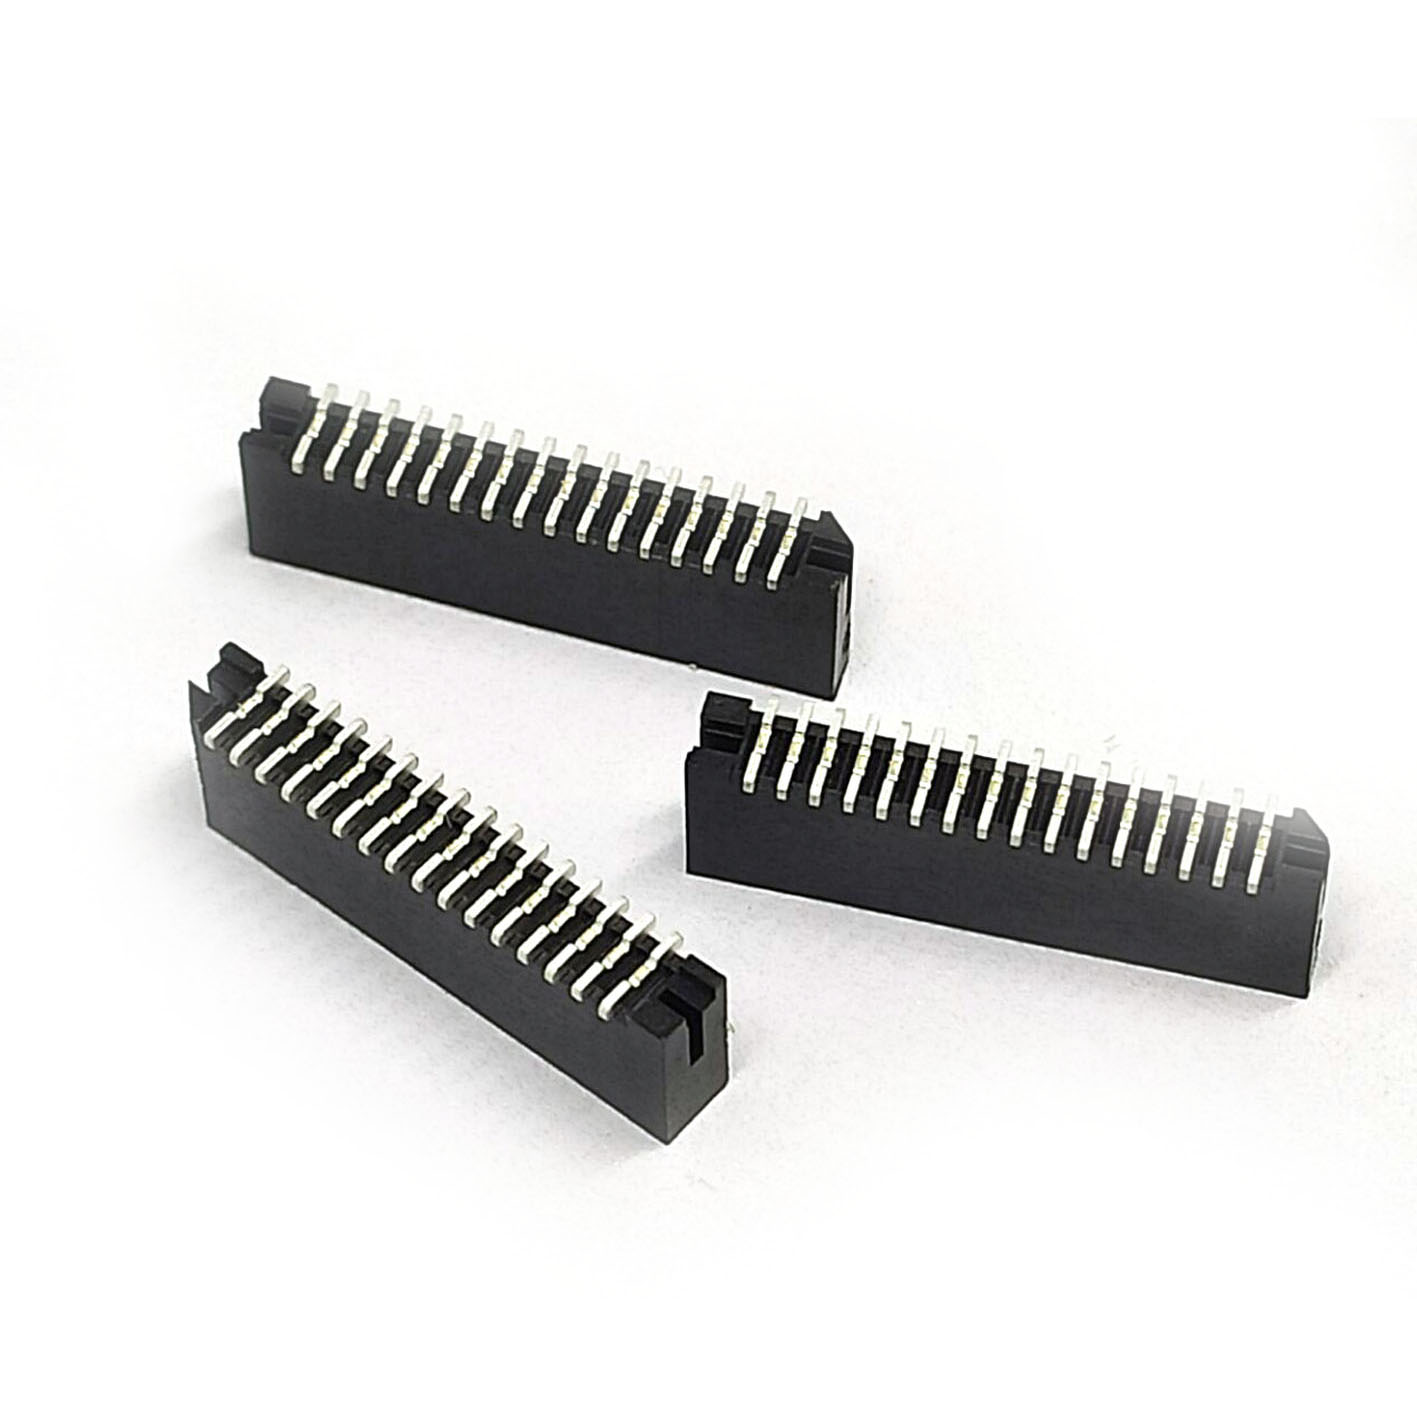 LIF CONNECTOR pitch 1.0mm FPC Non Zif Vertical SMT Type Double Contacts 4PINS 16Pins